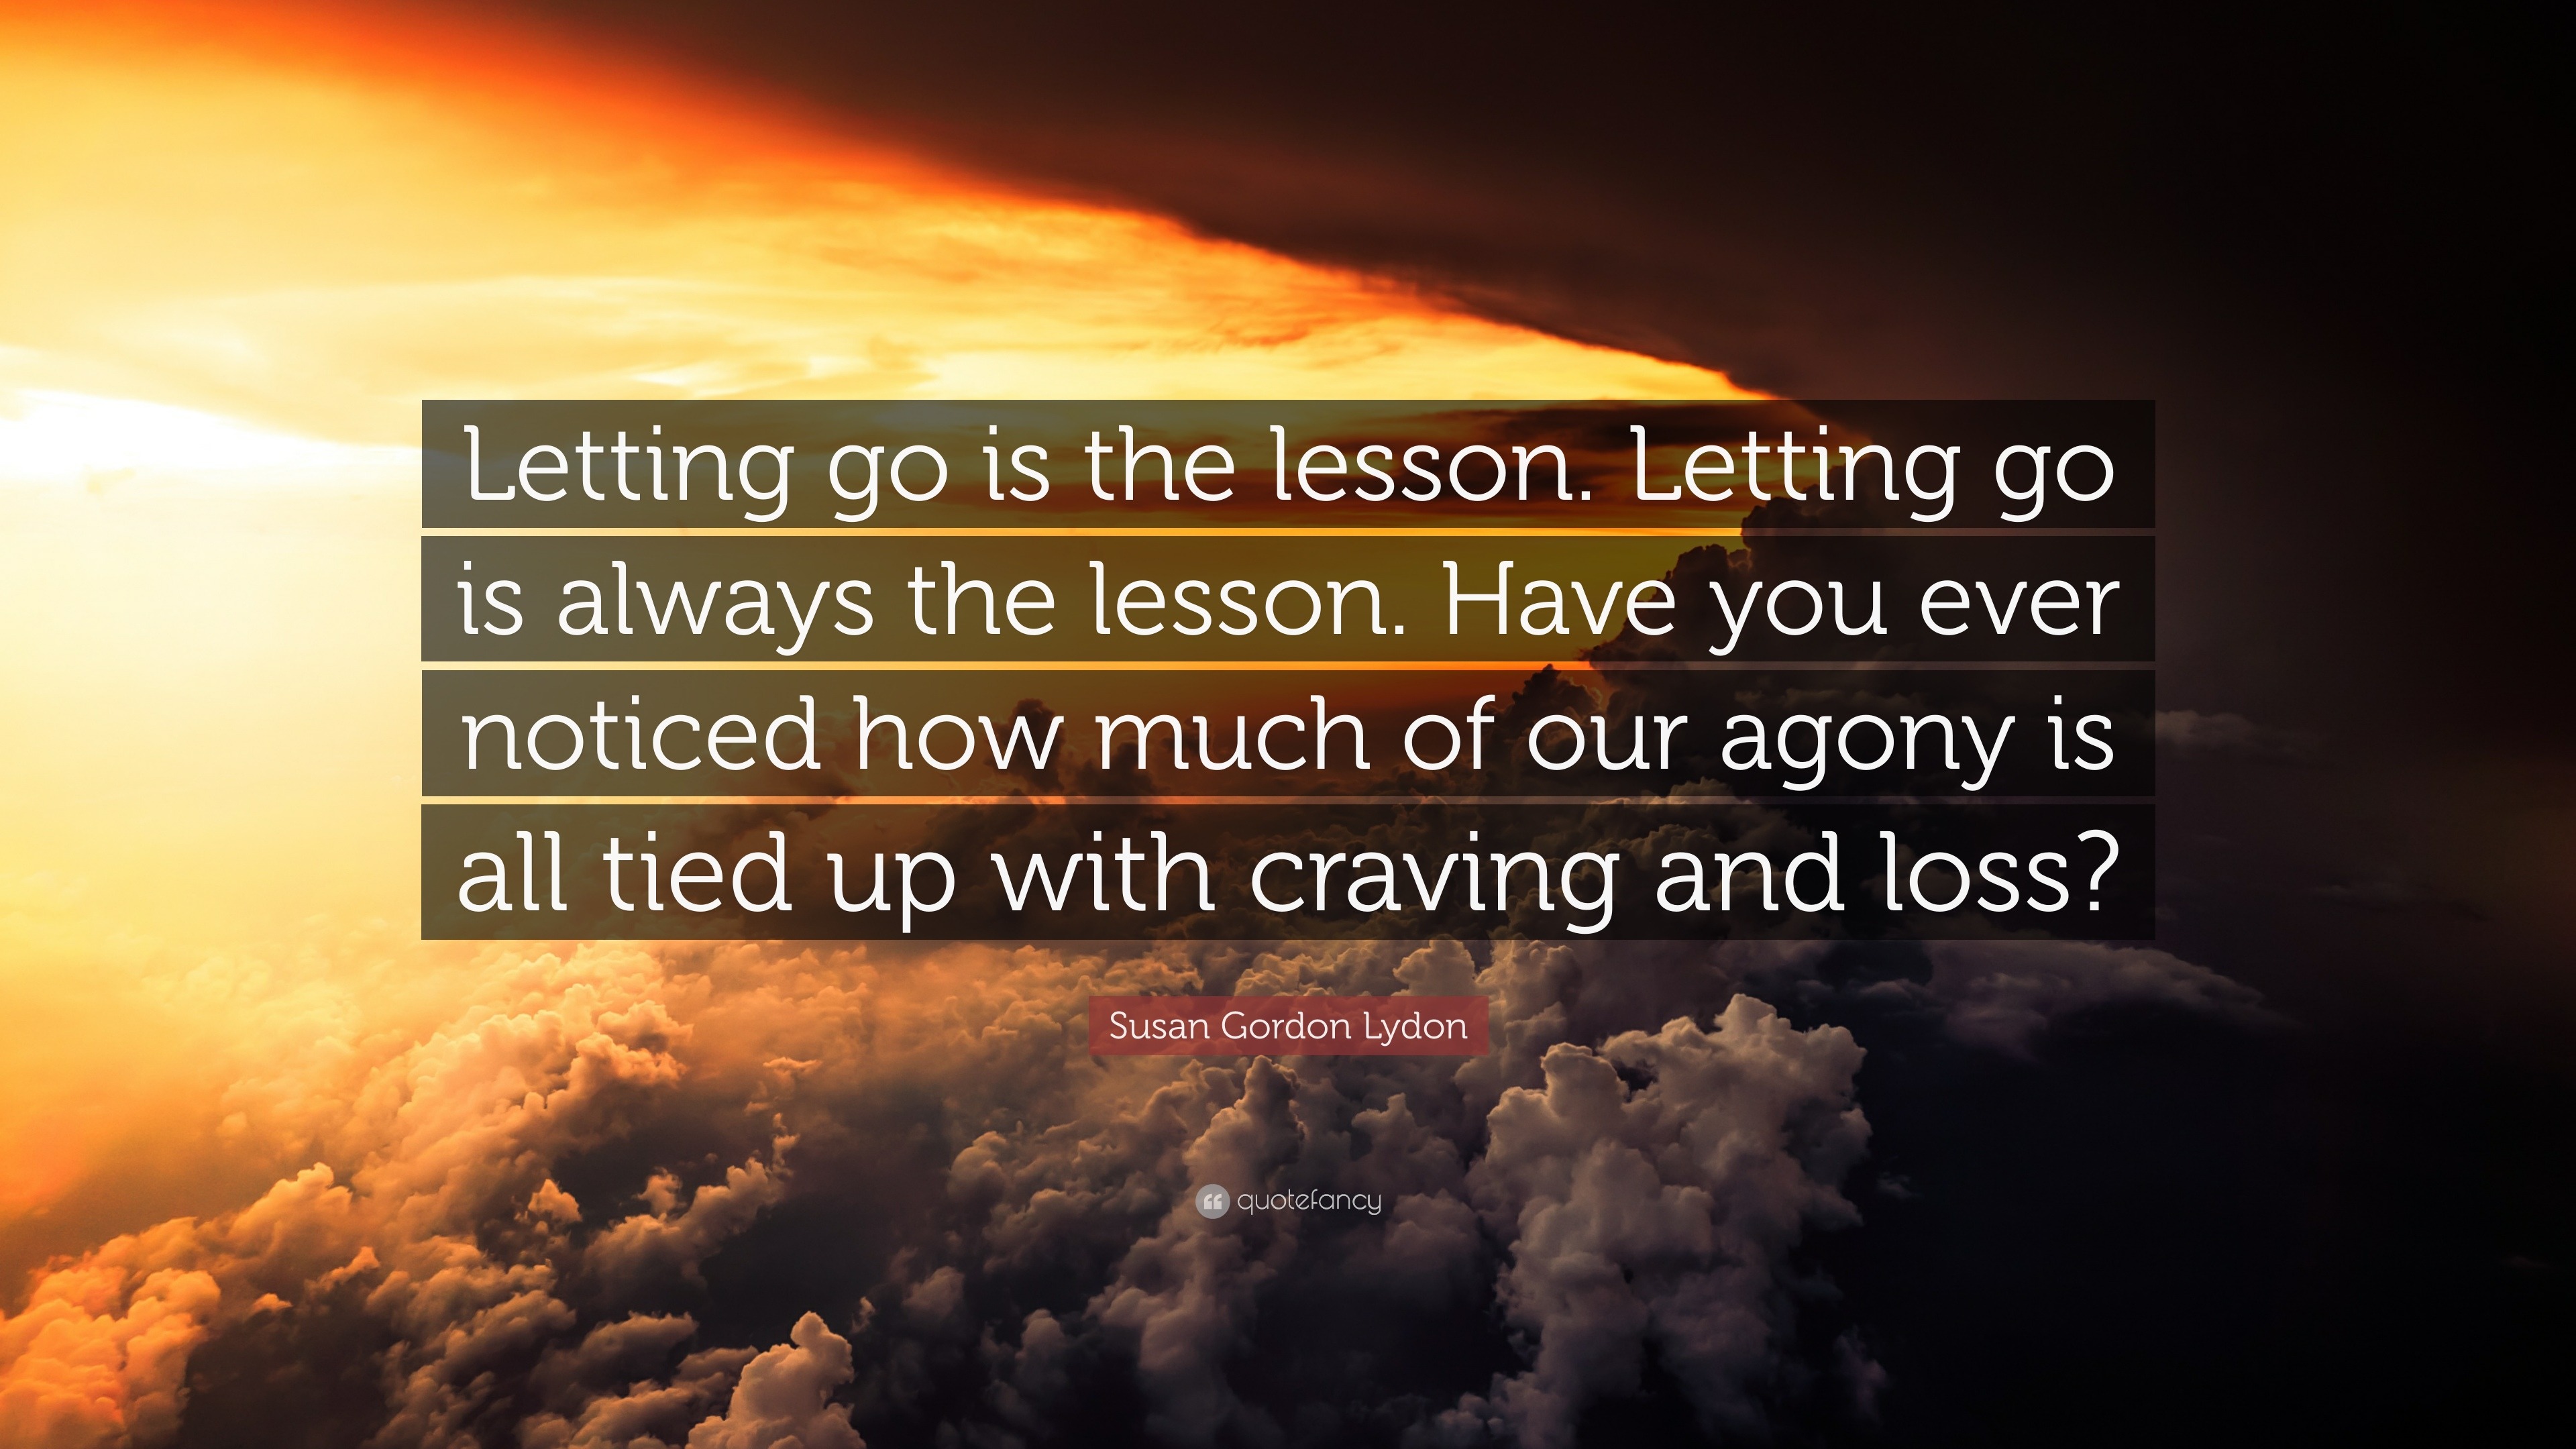 Writehiswrongs - We learn lessons the hard way. Sometimes losing you is  their lesson. Good Morning ☀️ #writehiswrongs #writewrongs